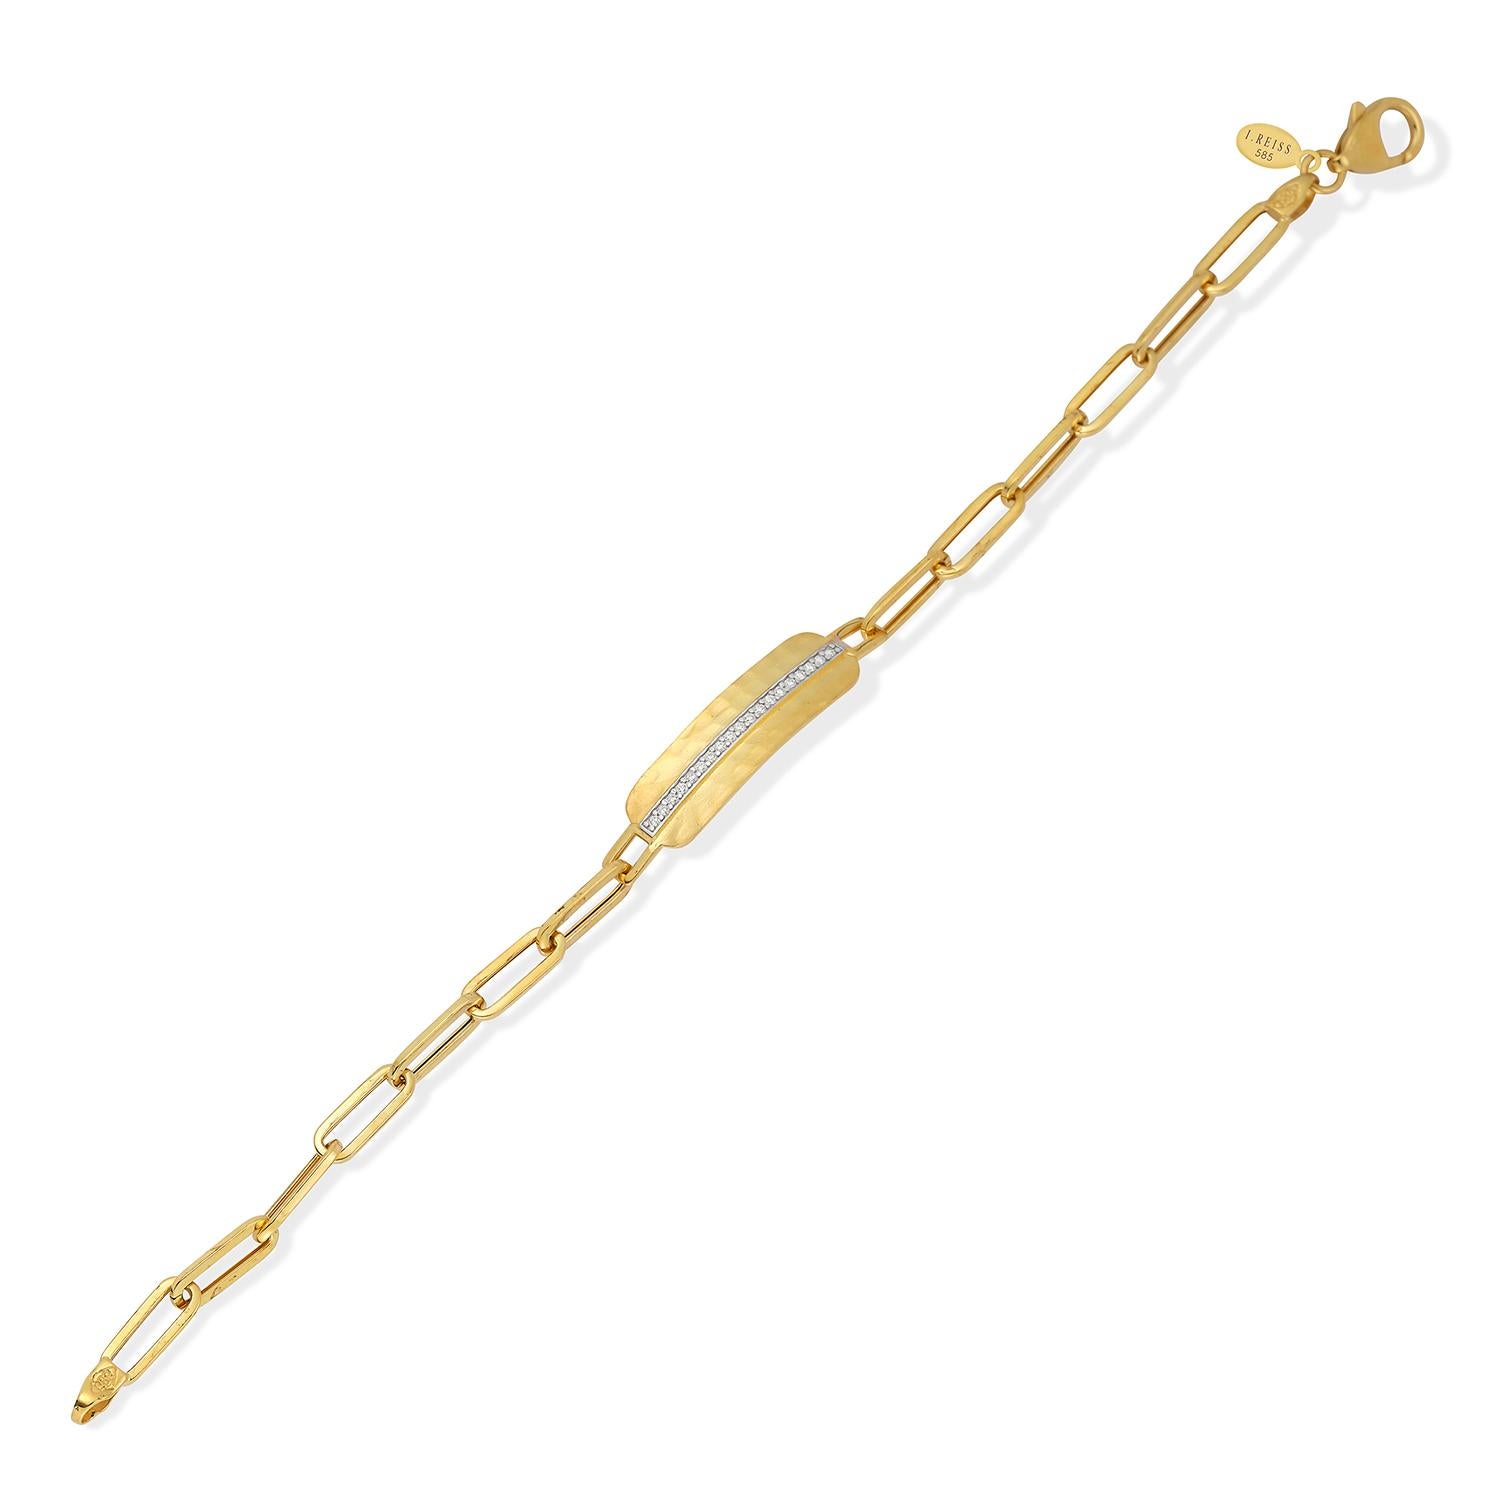 14 Karat Yellow Gold Hand-Crafted Polish-Finished Open Link Dog-Tag Bracelet, Accented with 0.11 Carats of Pave Set Diamonds and a Lobster-Claw-Clasp.
